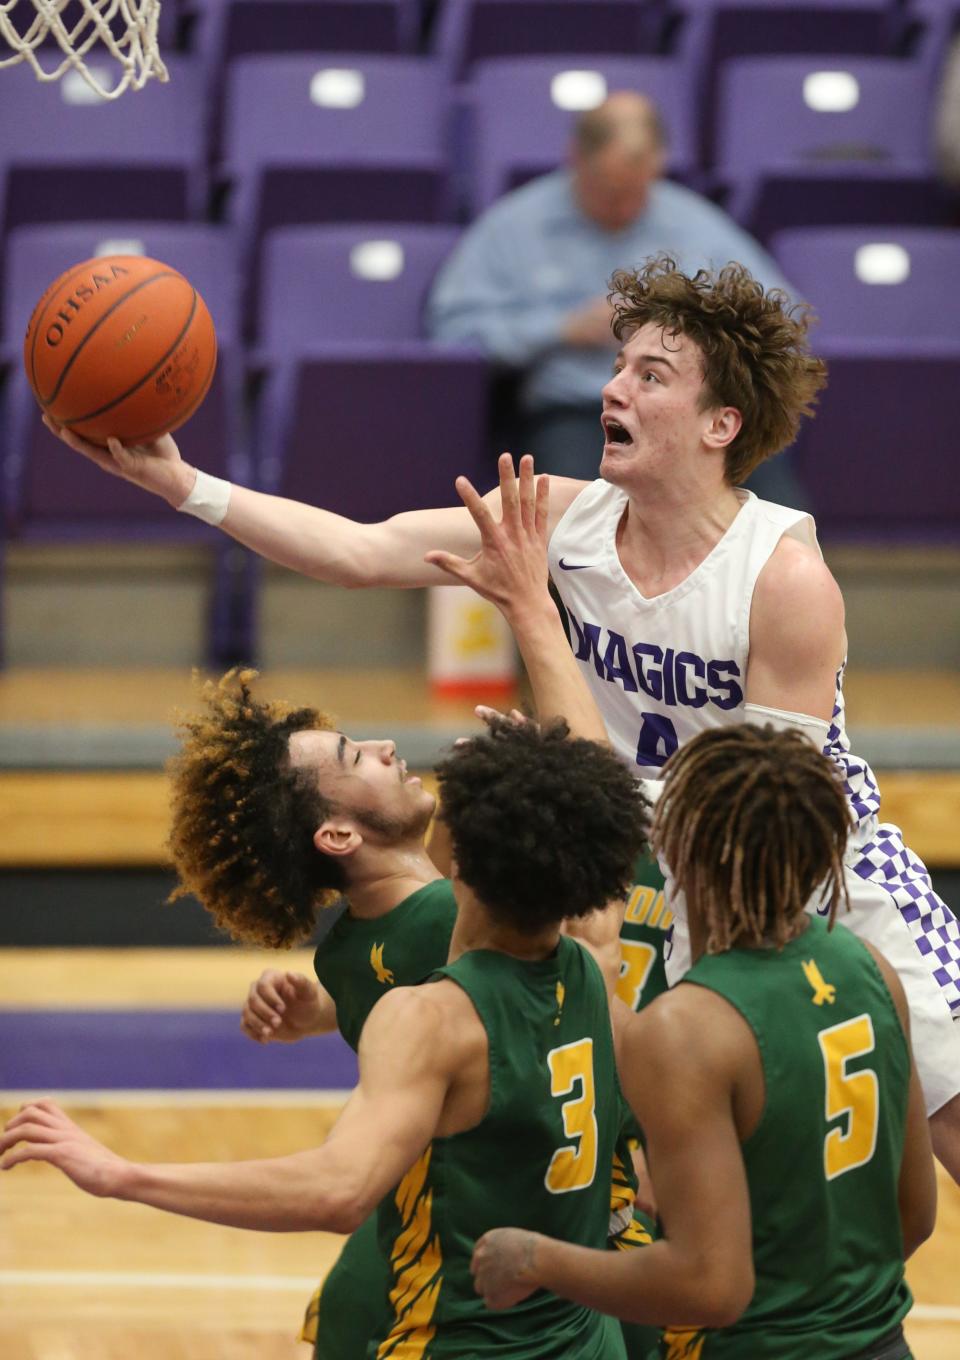 Barberton's Kaige Lowe drives to the basket over three Firestone defenders during the second quarter of the Falcons' 50-48 win Wednesday night. [Phil Masturzo/Beacon Journal]